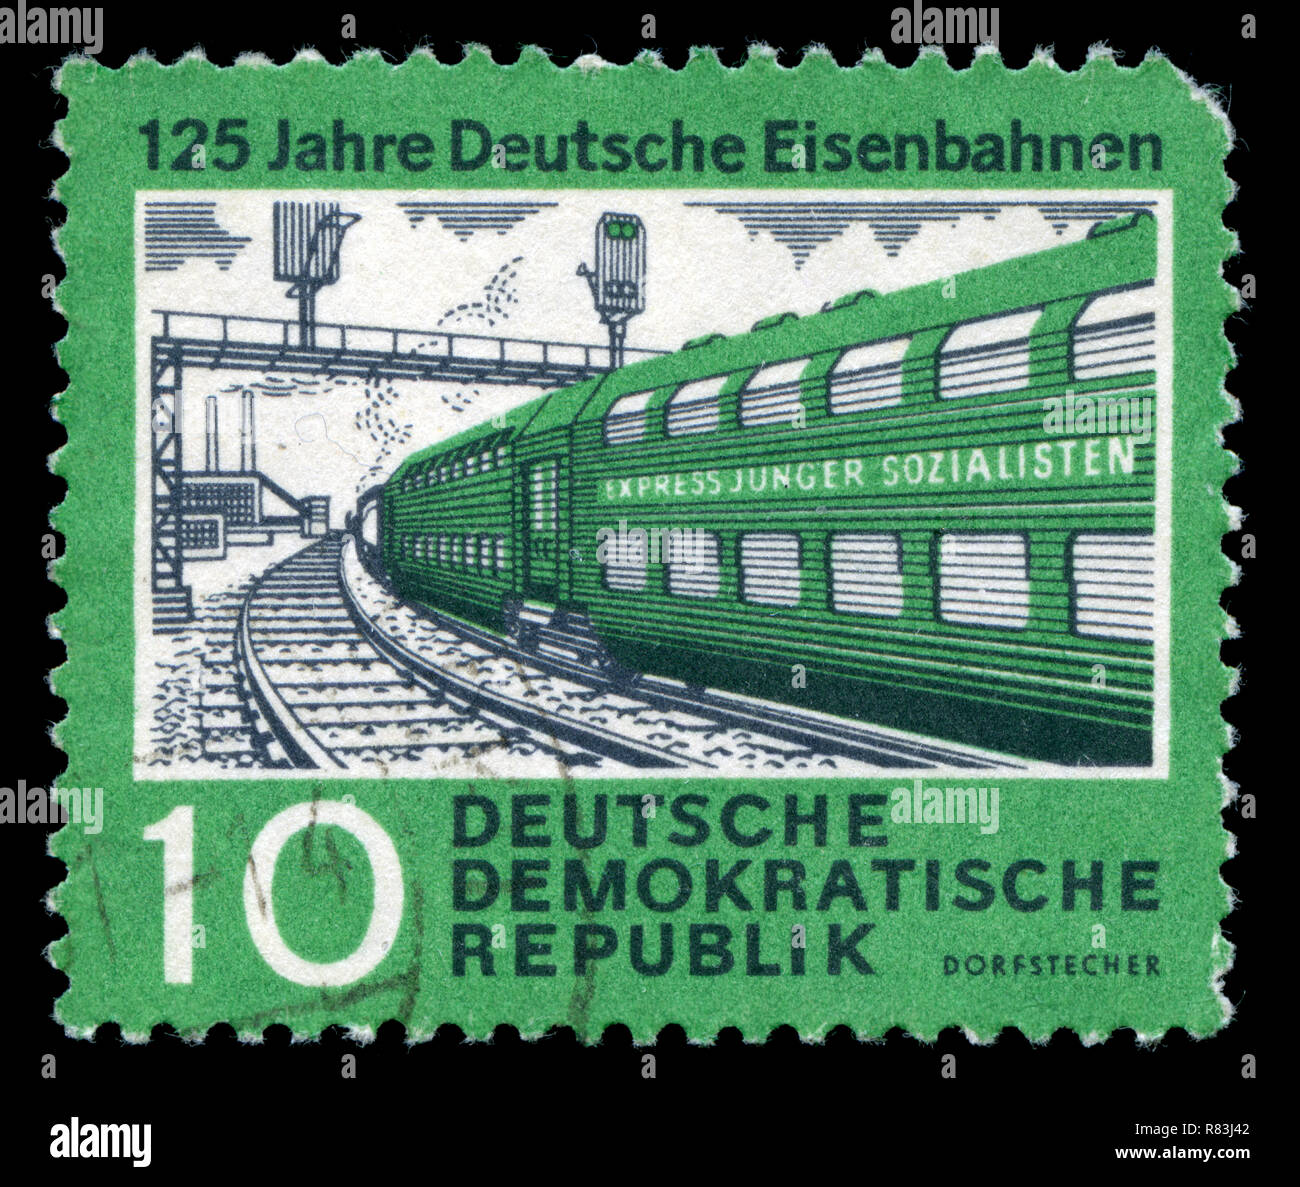 Postmarked stamp from the East Germany in the 125 Years of German Railways series issued in 1960 Stock Photo